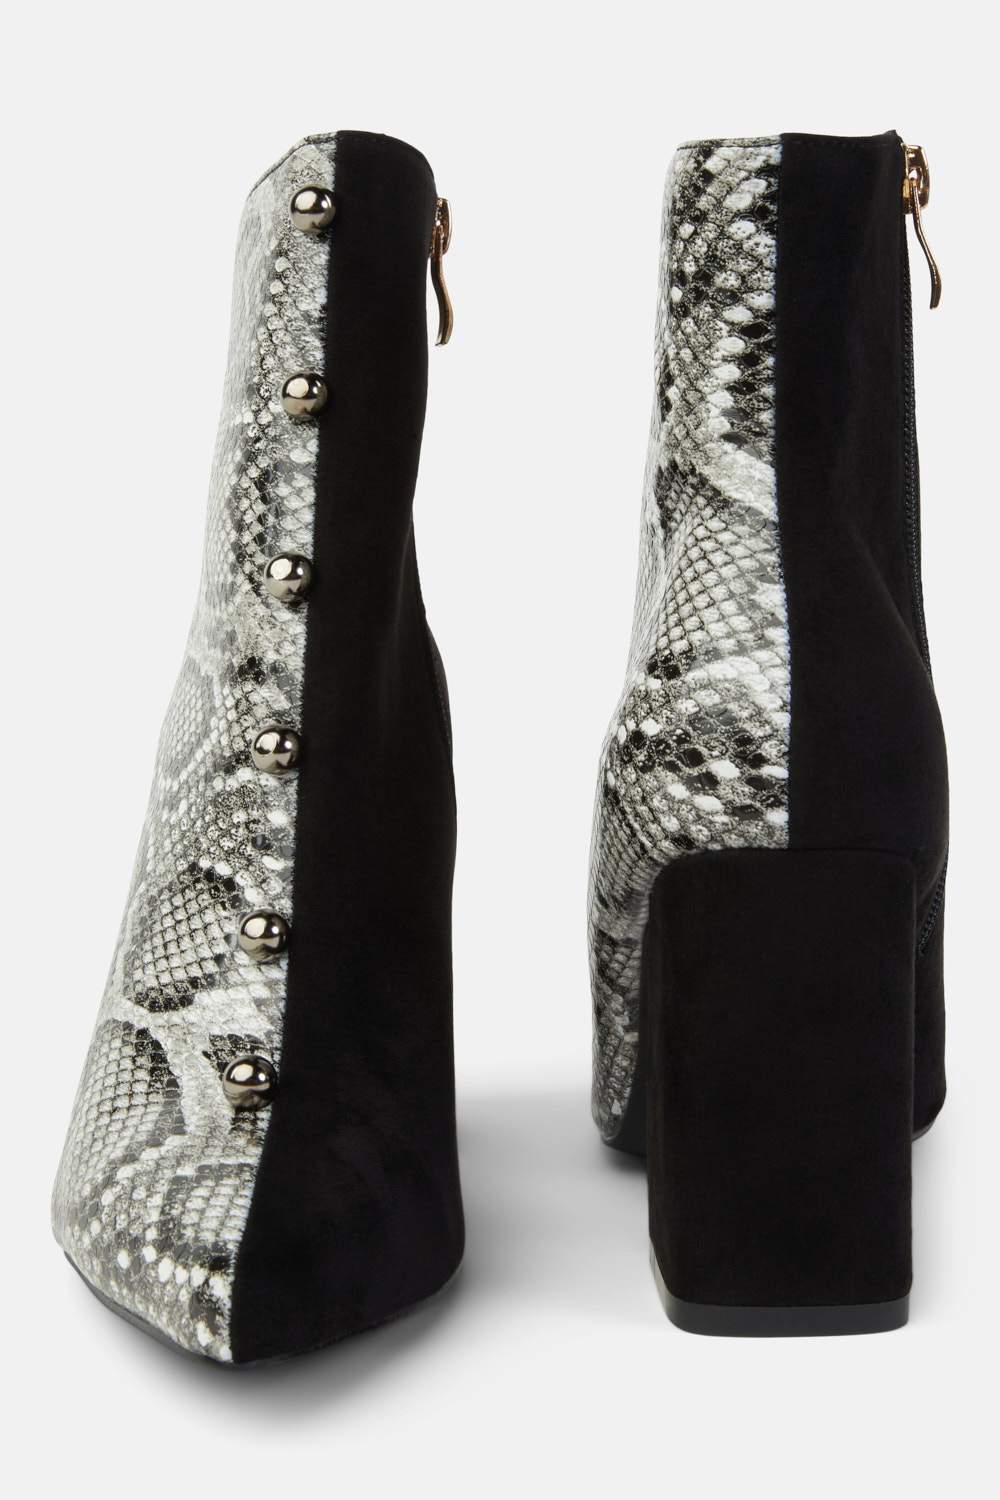 AnnaCristy Milano SHOES Ronan Black Python Suede Ankle Boots